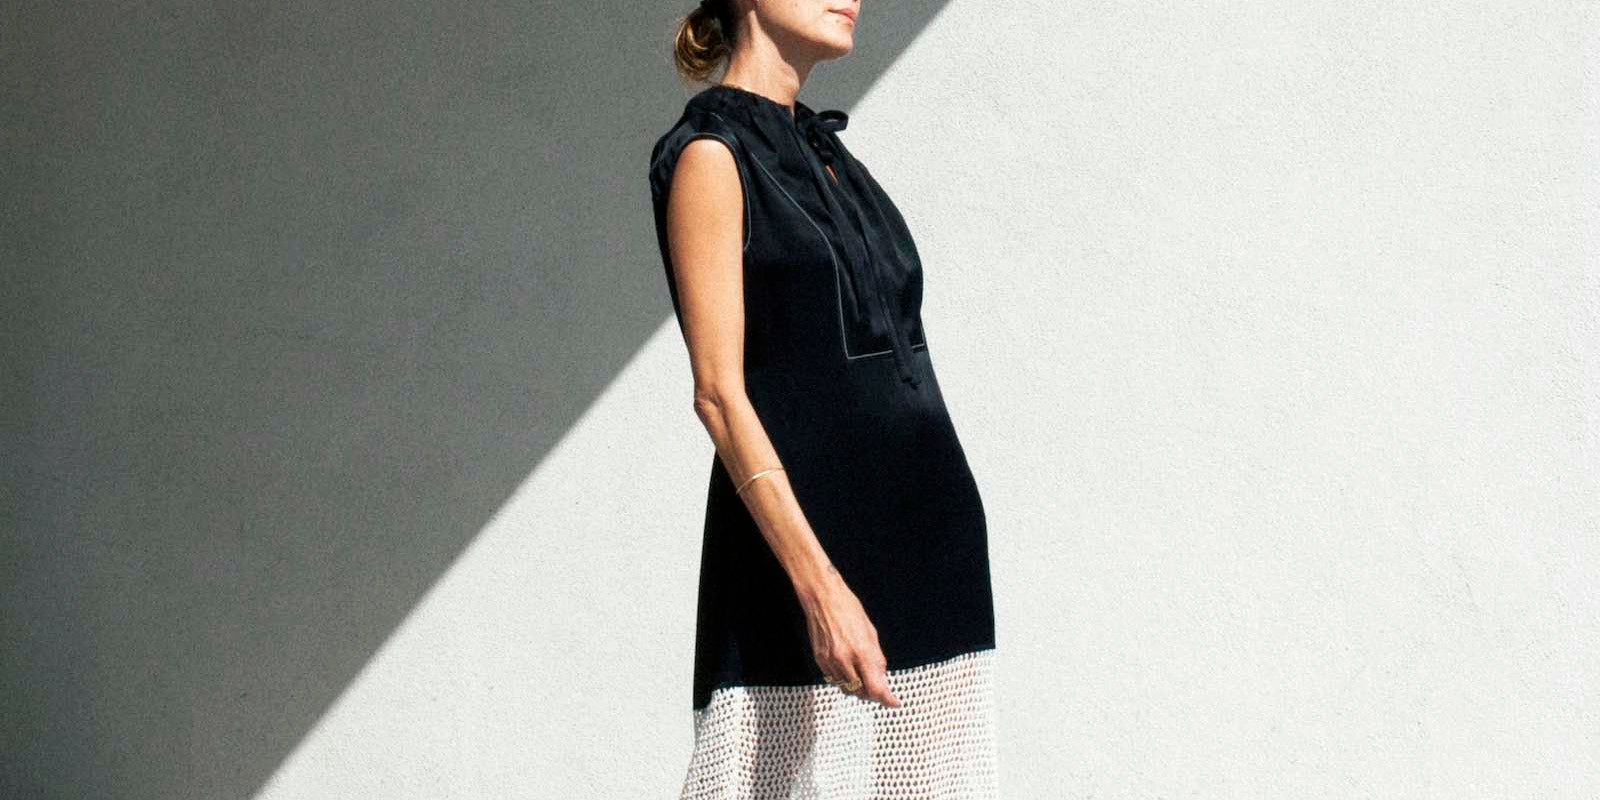 Model stands in the sun against white wall wearing a black sleeveless dress with white crochet bottom. 